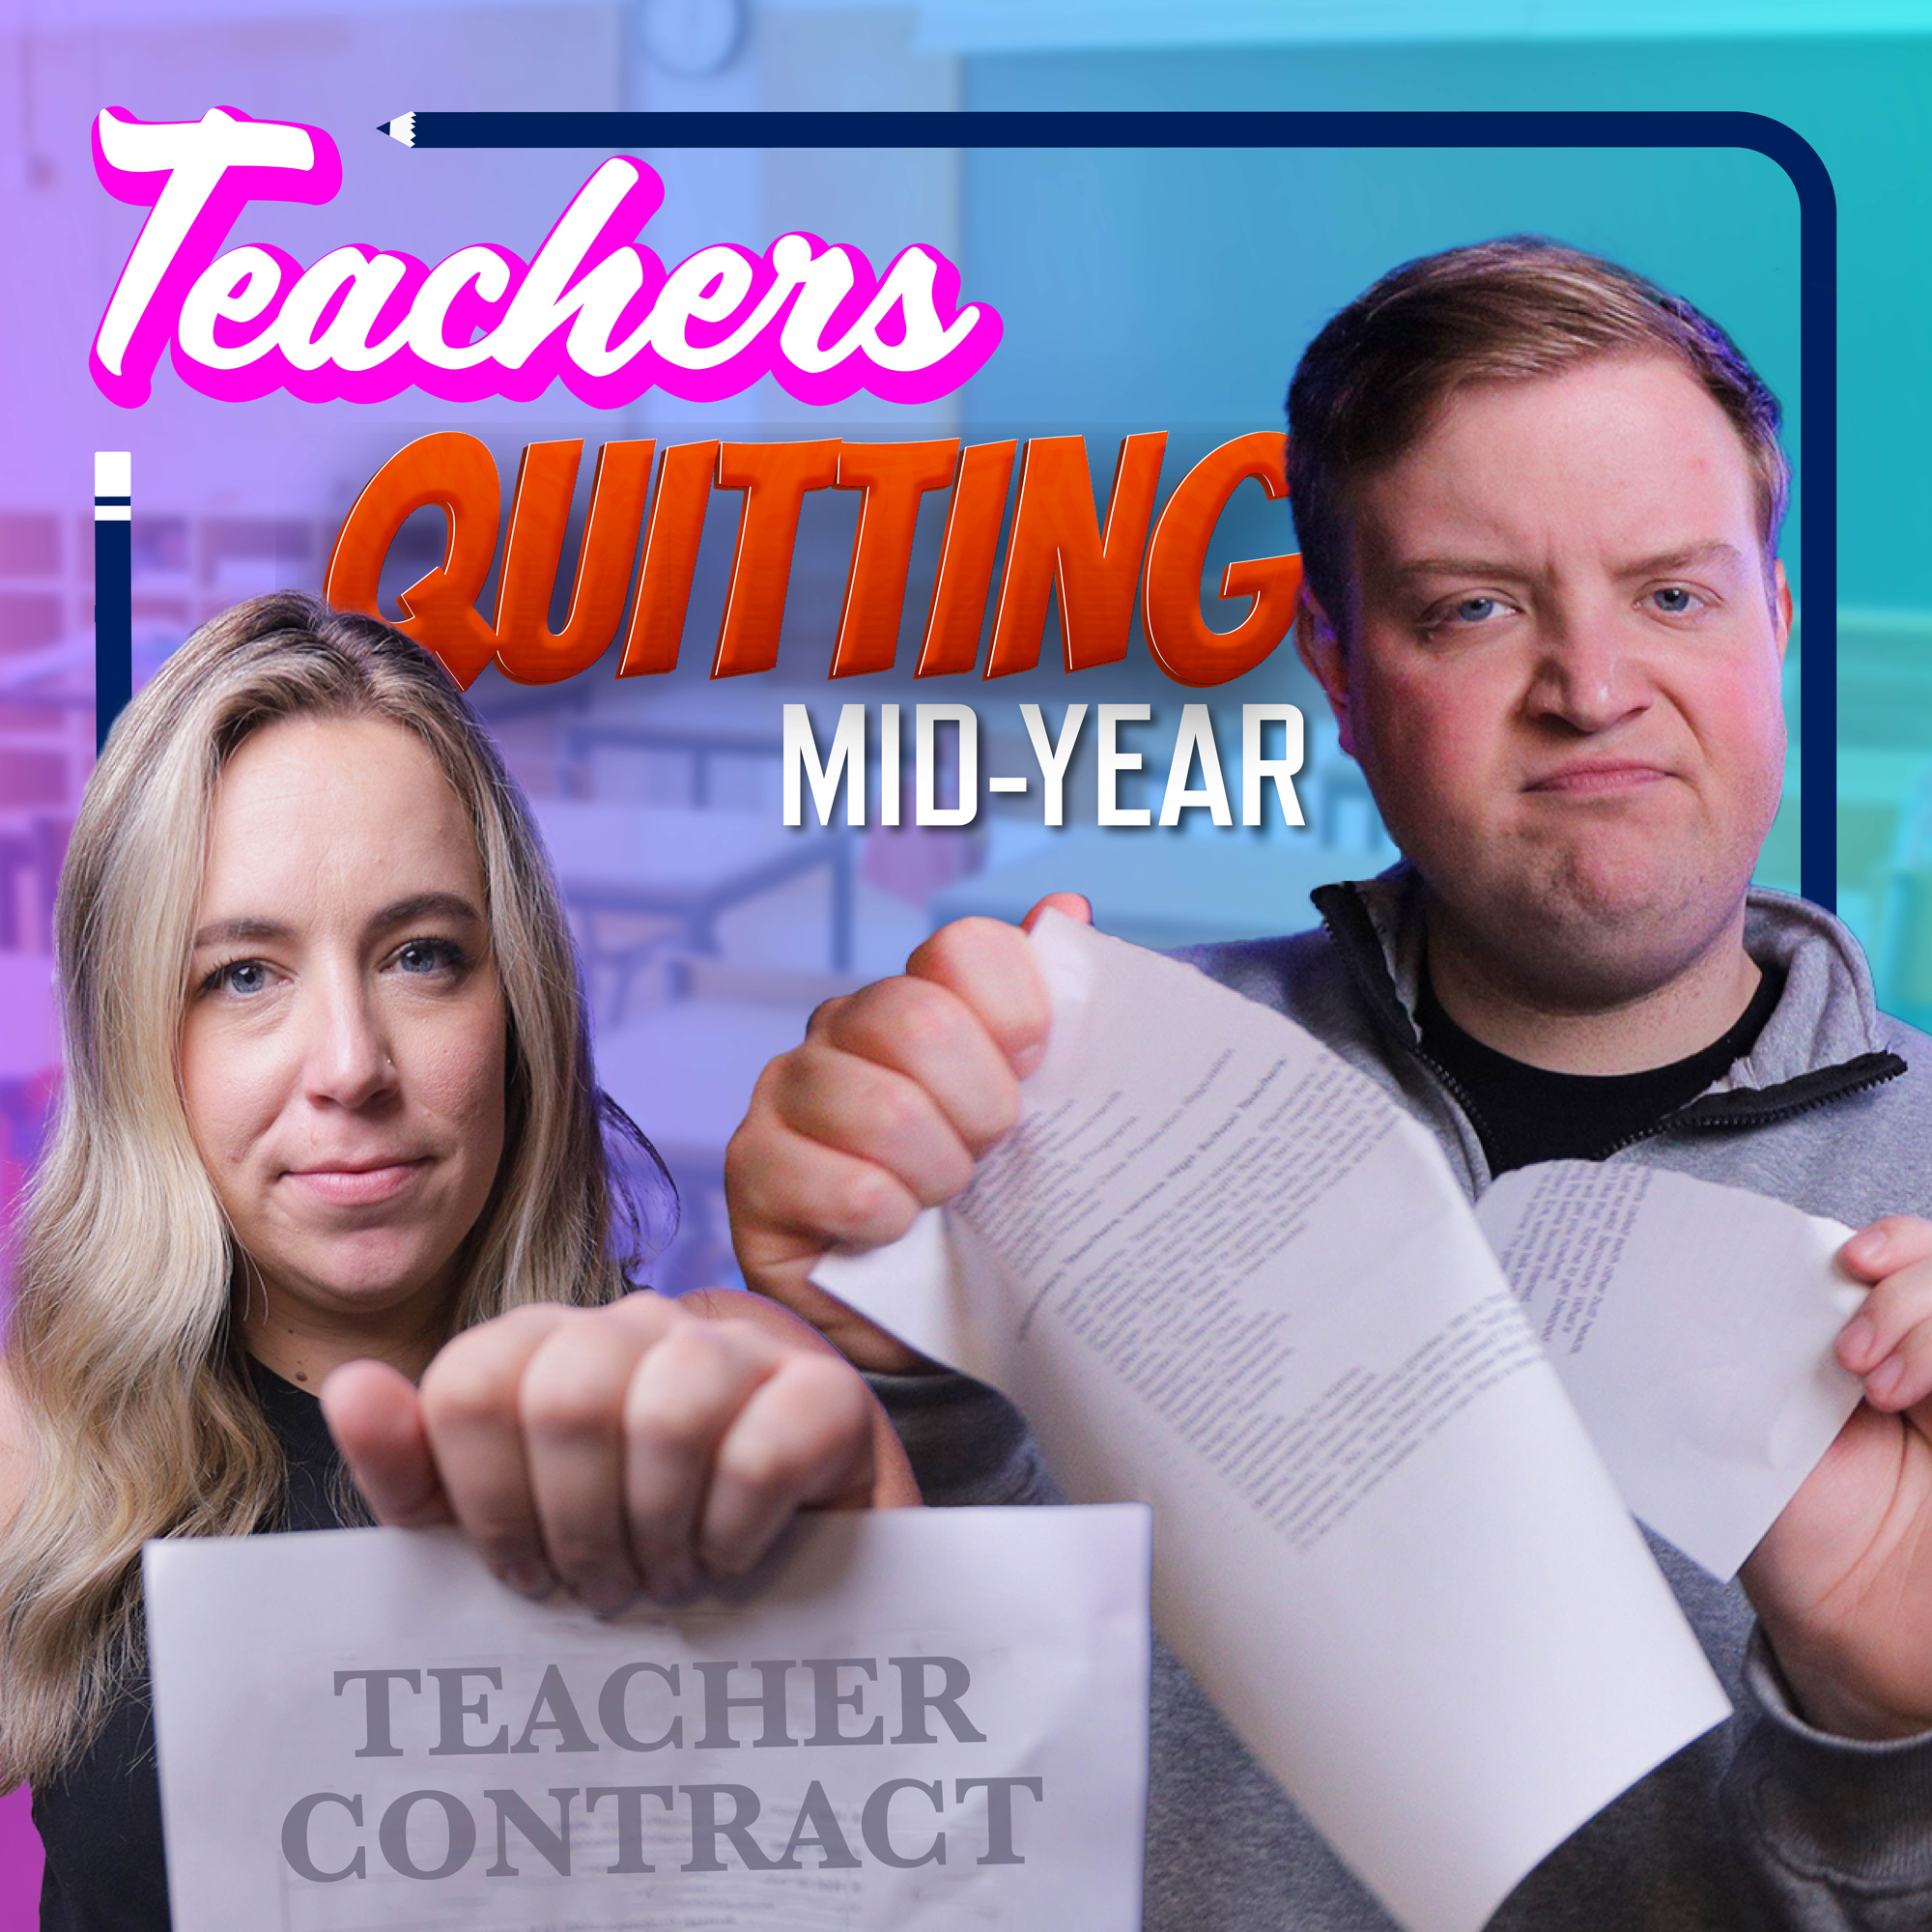 Why Are Teachers Quitting Mid-Year?